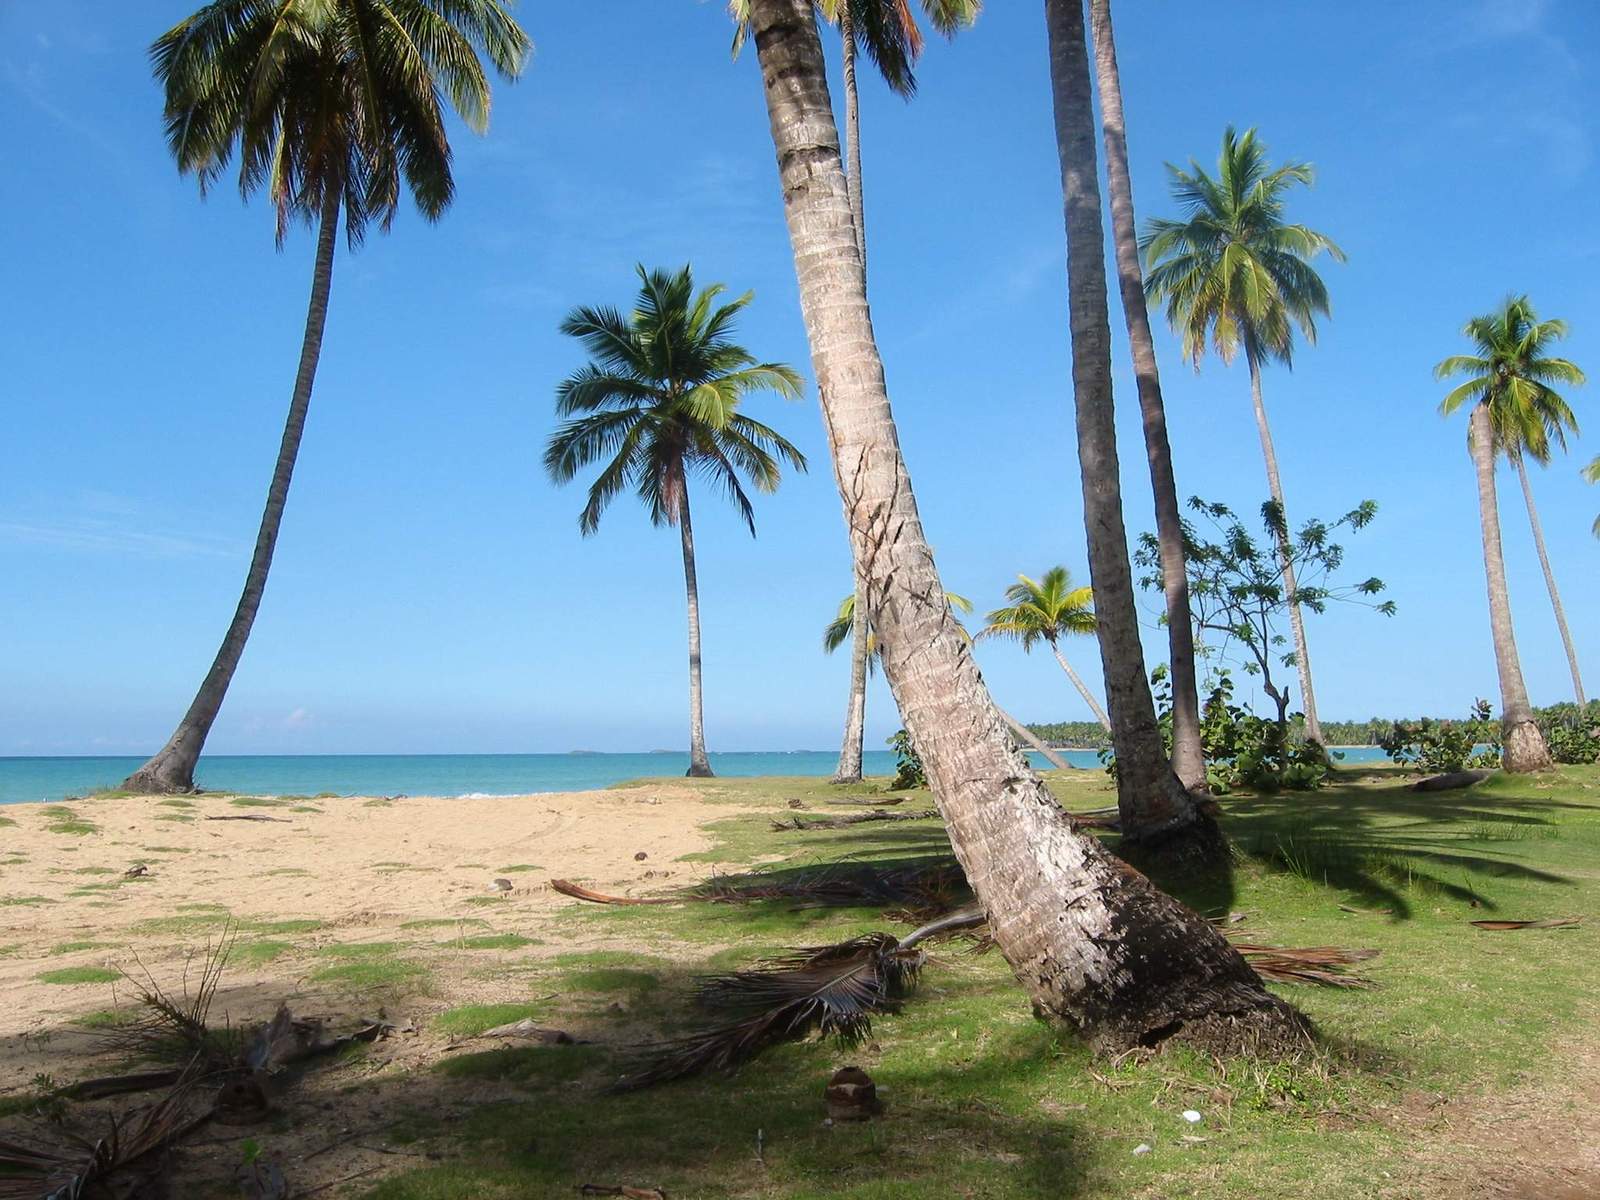 a scenic beach has many palm trees in the foreground